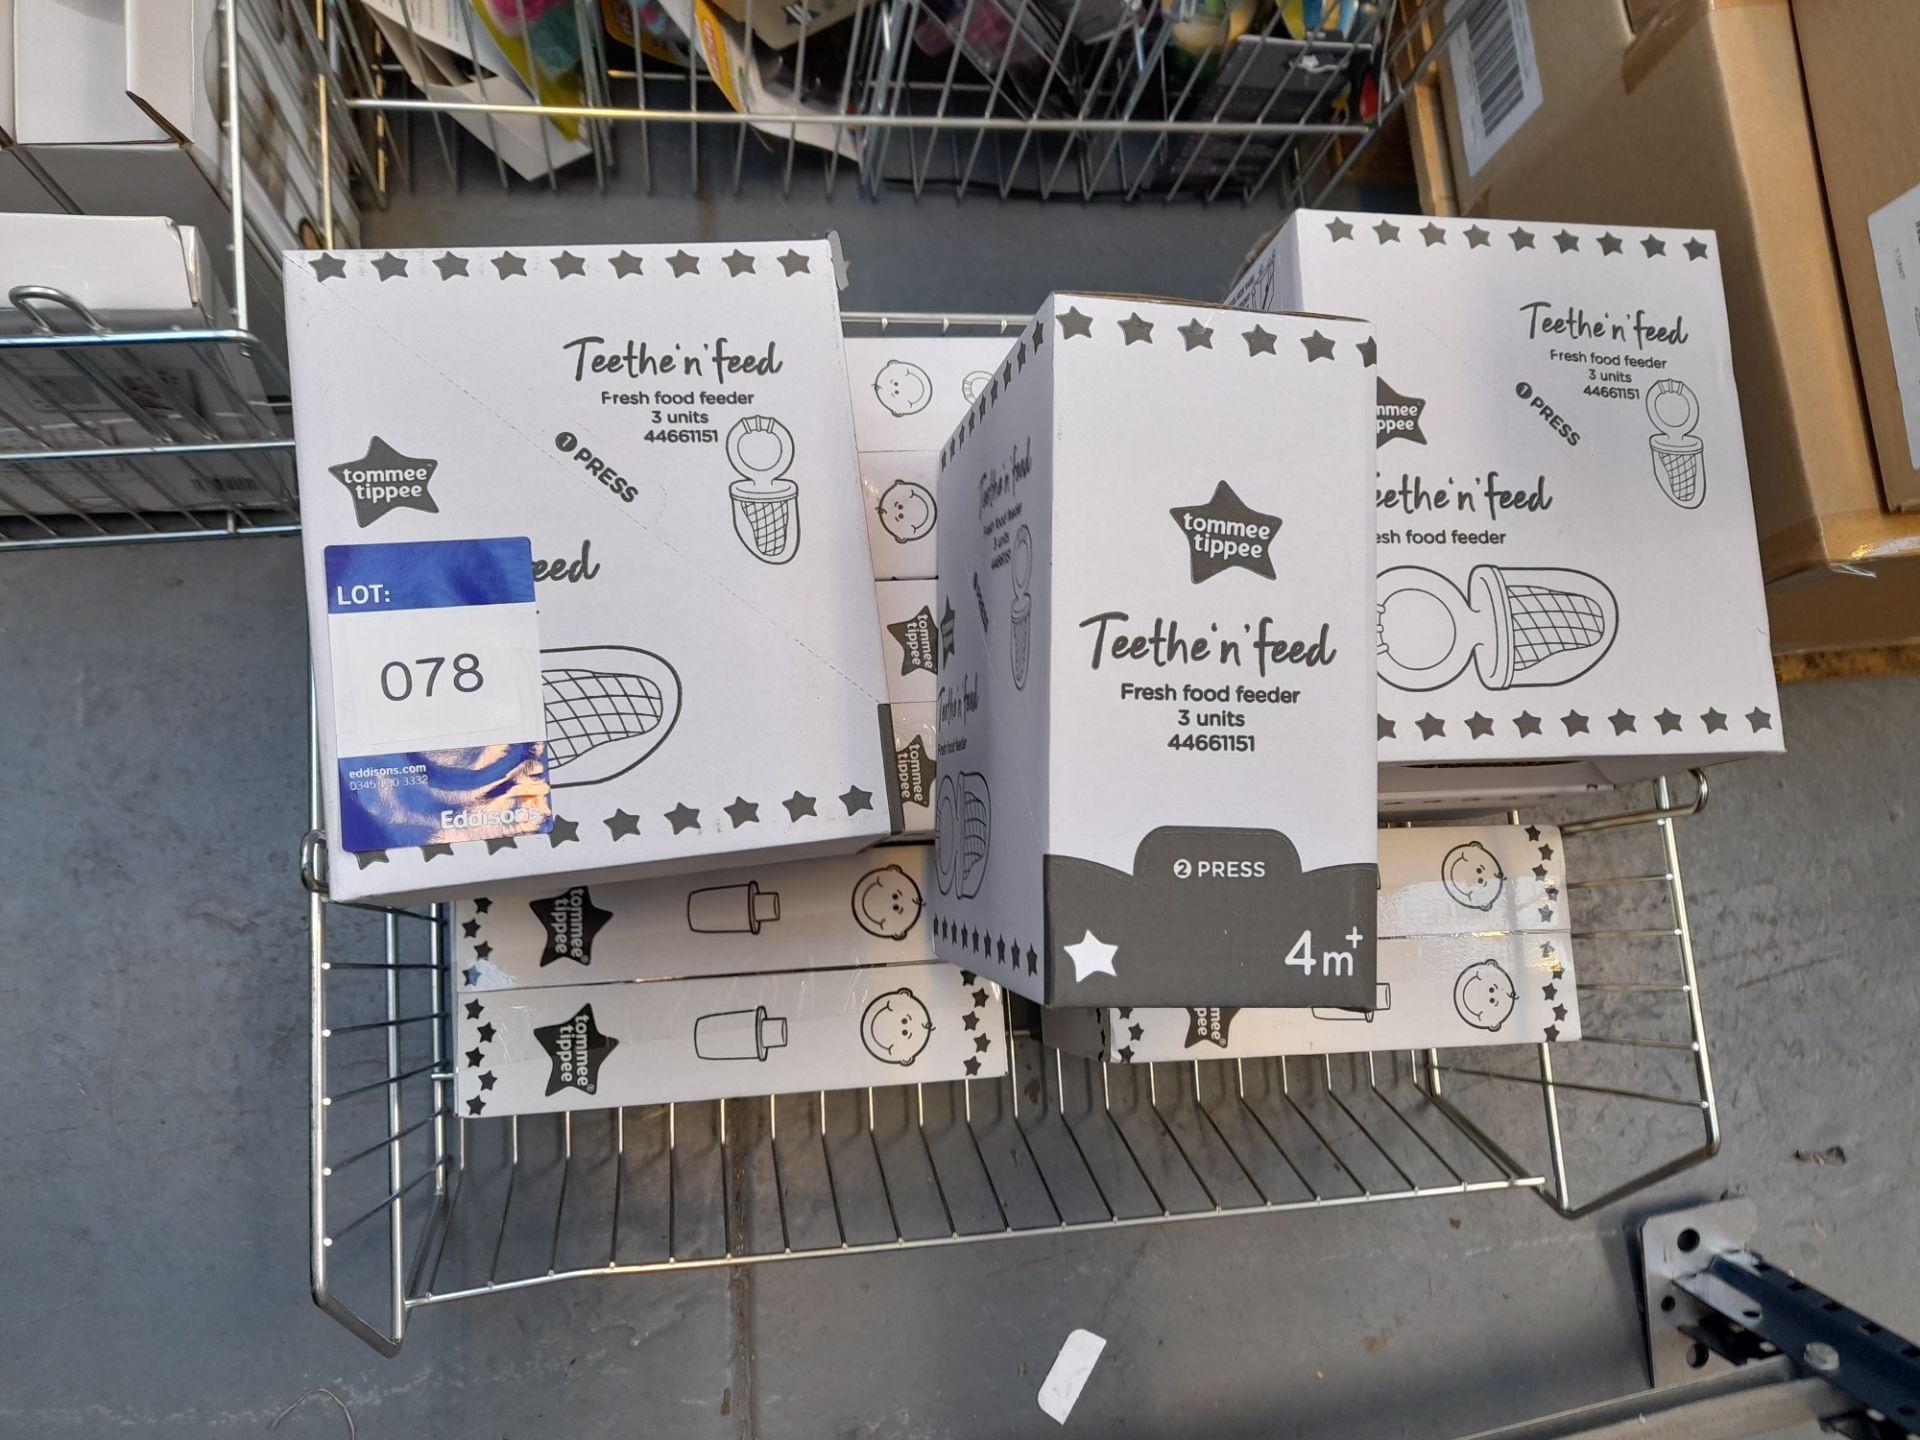 Contents of wire rack to contain Tommee Tippee fre